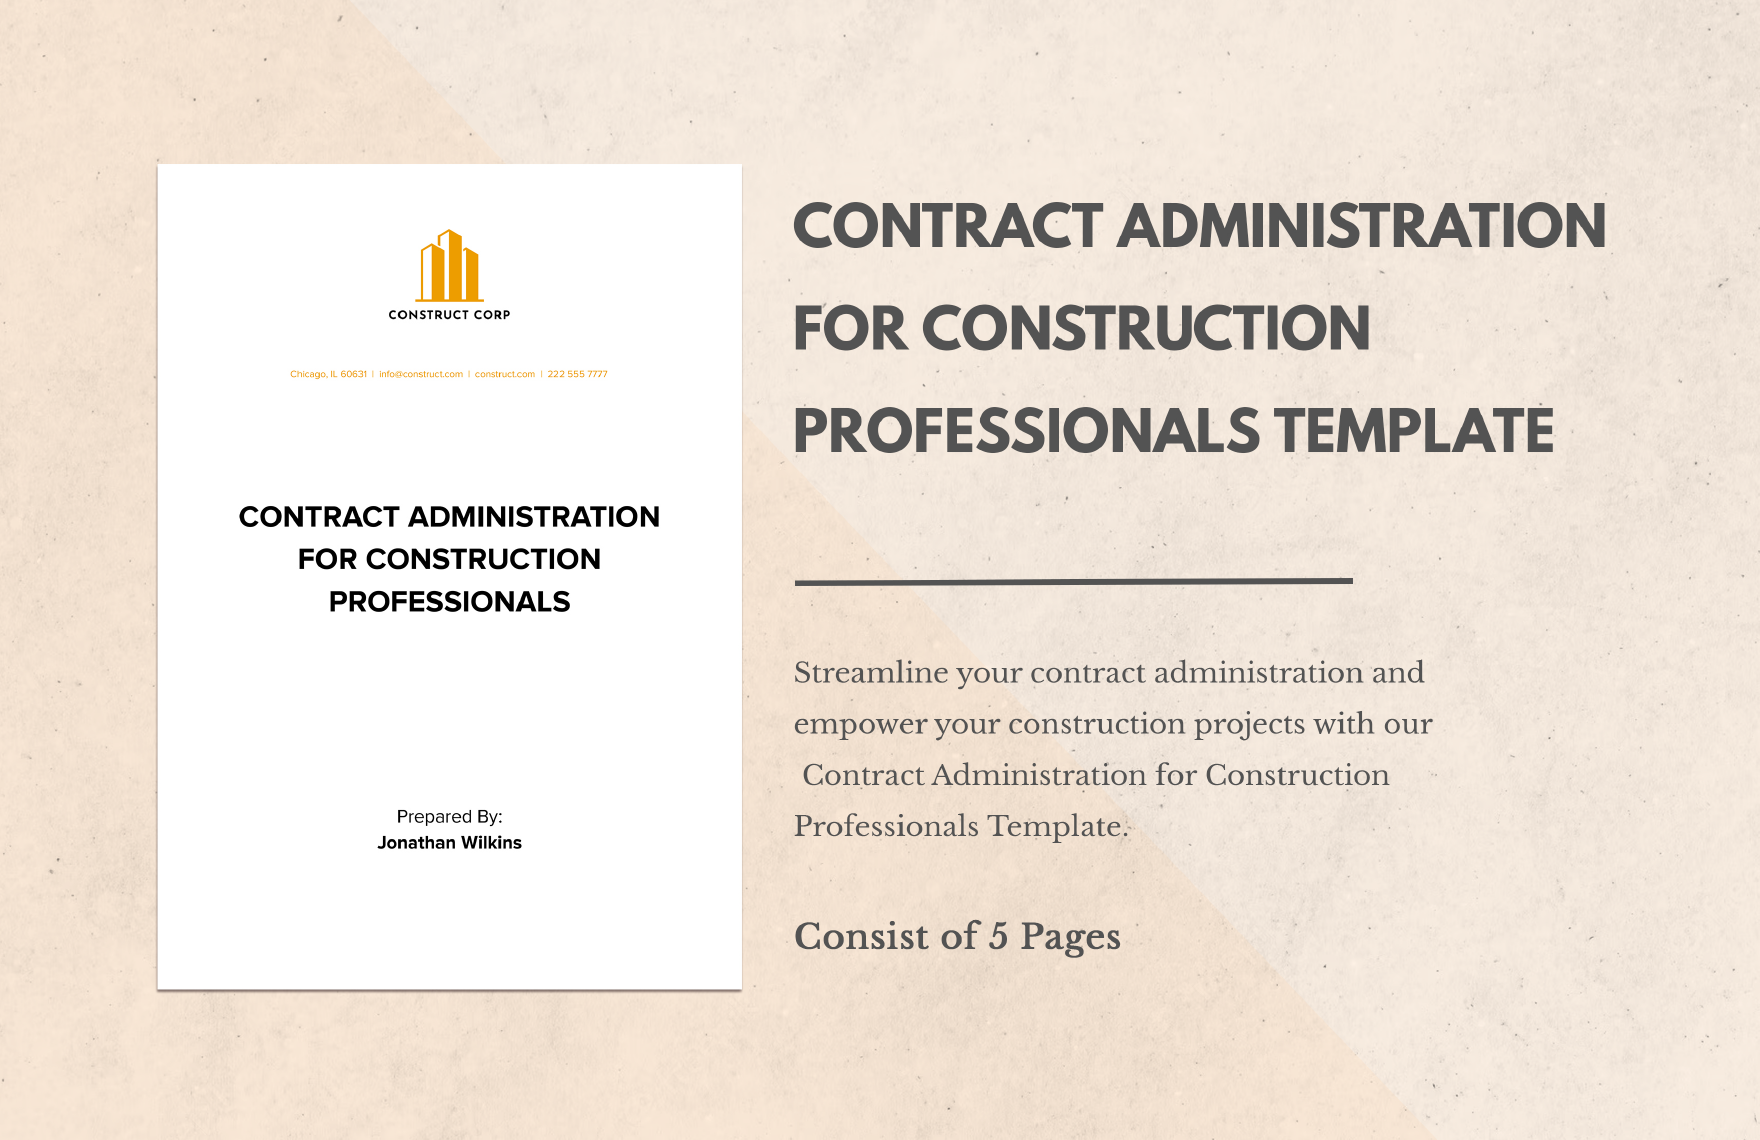 Contract Administration for Construction Professionals 